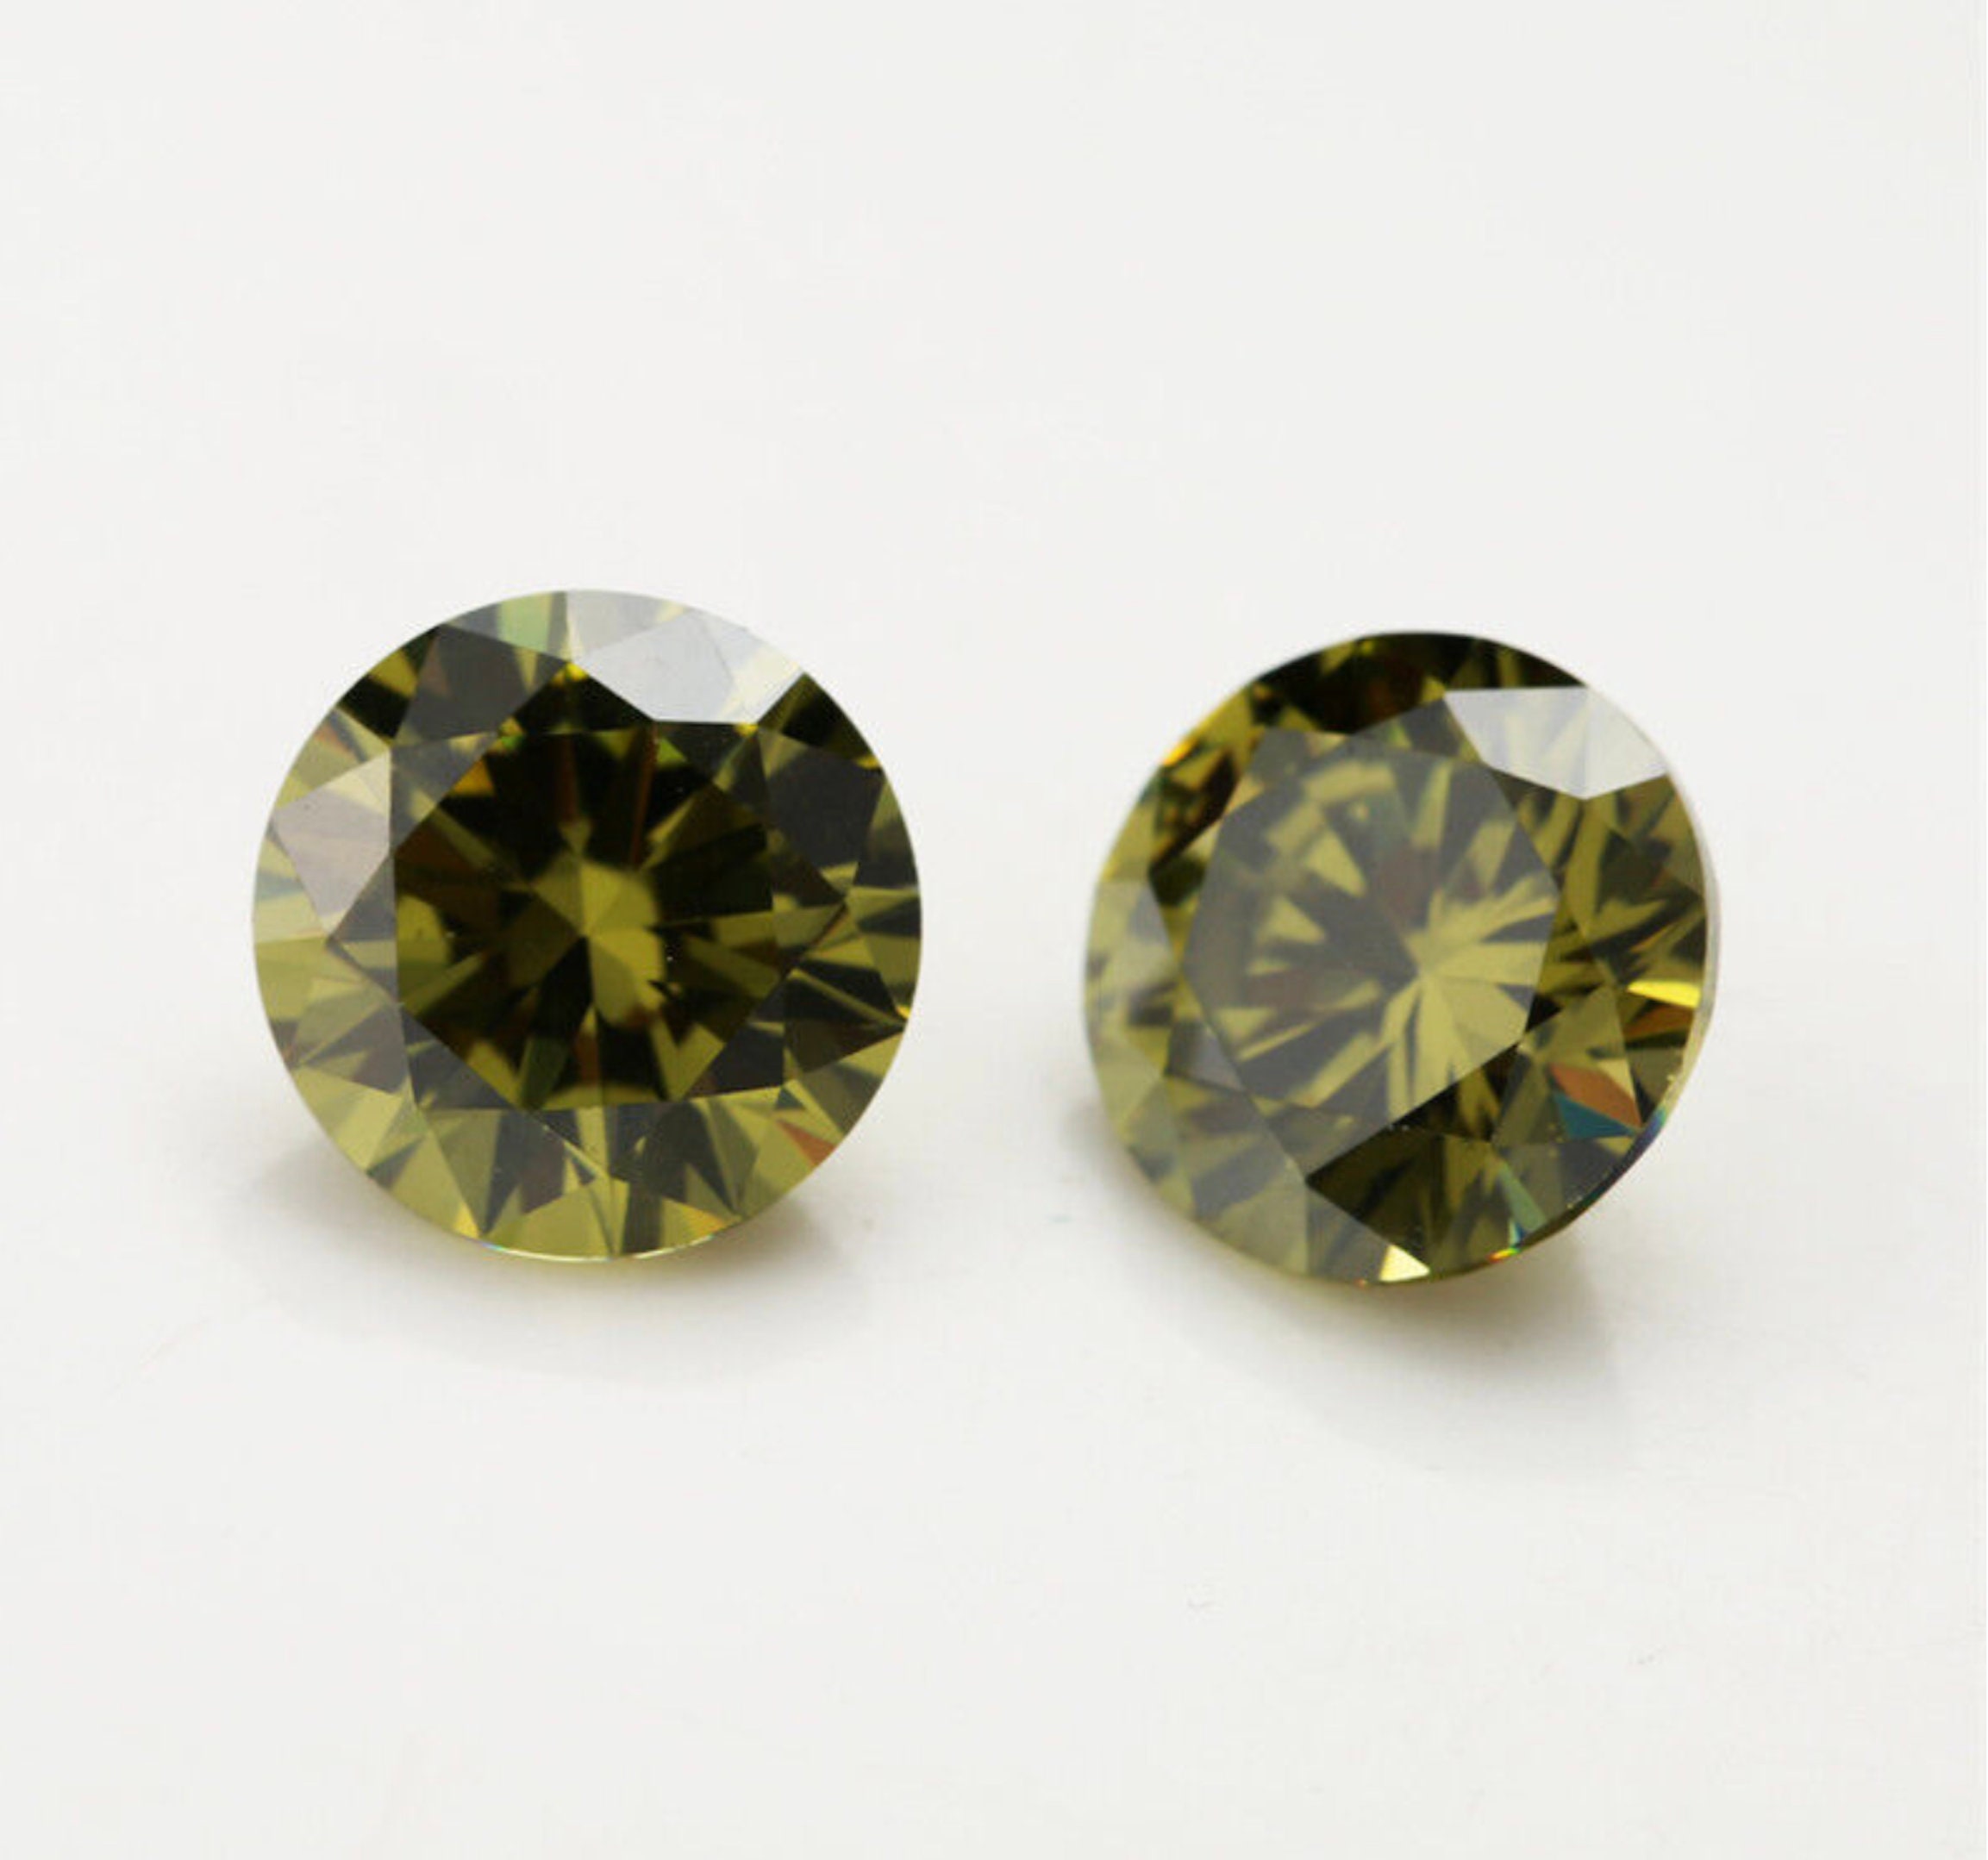 Buy Olive Green CZ Diamond AAA Stones, Round Faceted Cubic Zirconia Crystal  Diamond Loose Stones, Luxury Jewelry Making Stones 1mm 17mm Online in India  